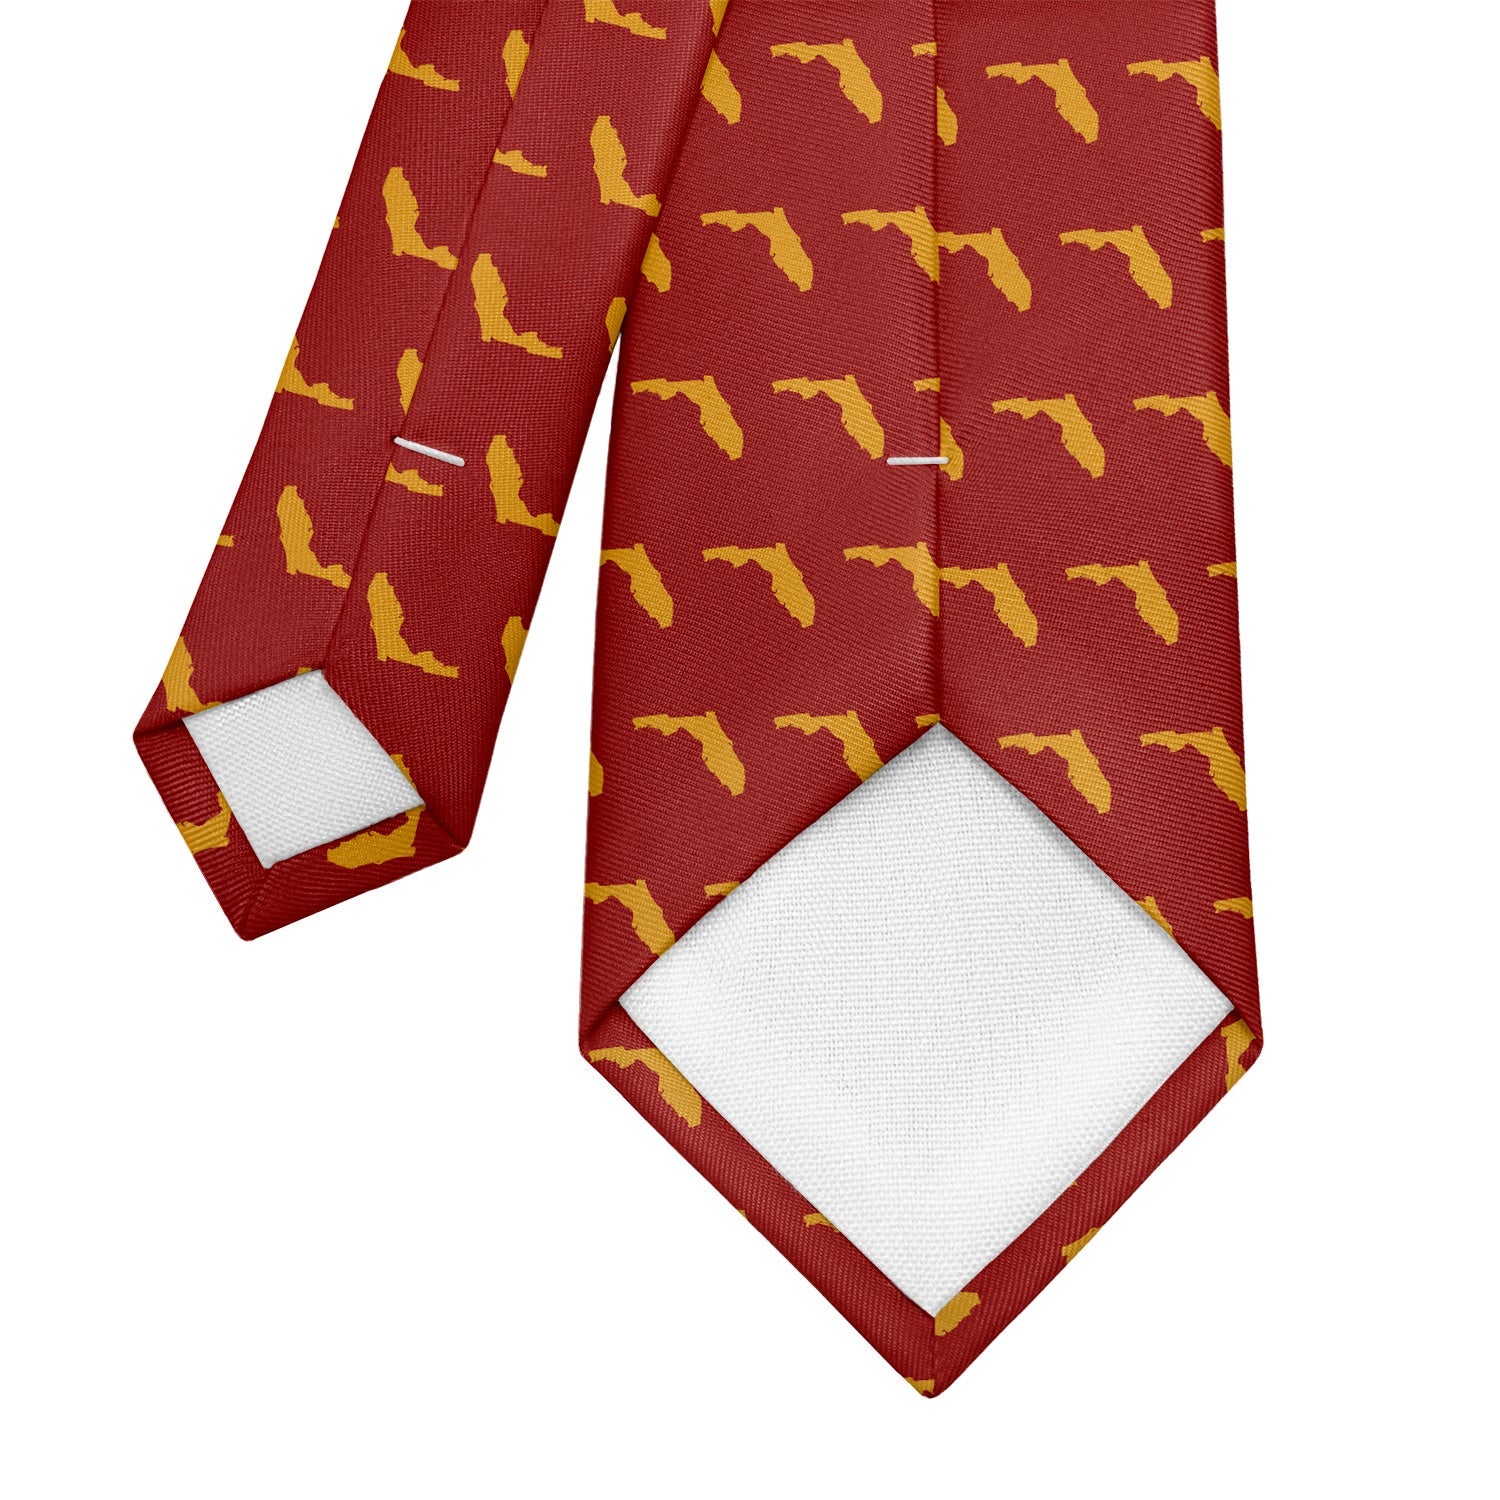 Florida State Outline Necktie - Tipping - Knotty Tie Co.